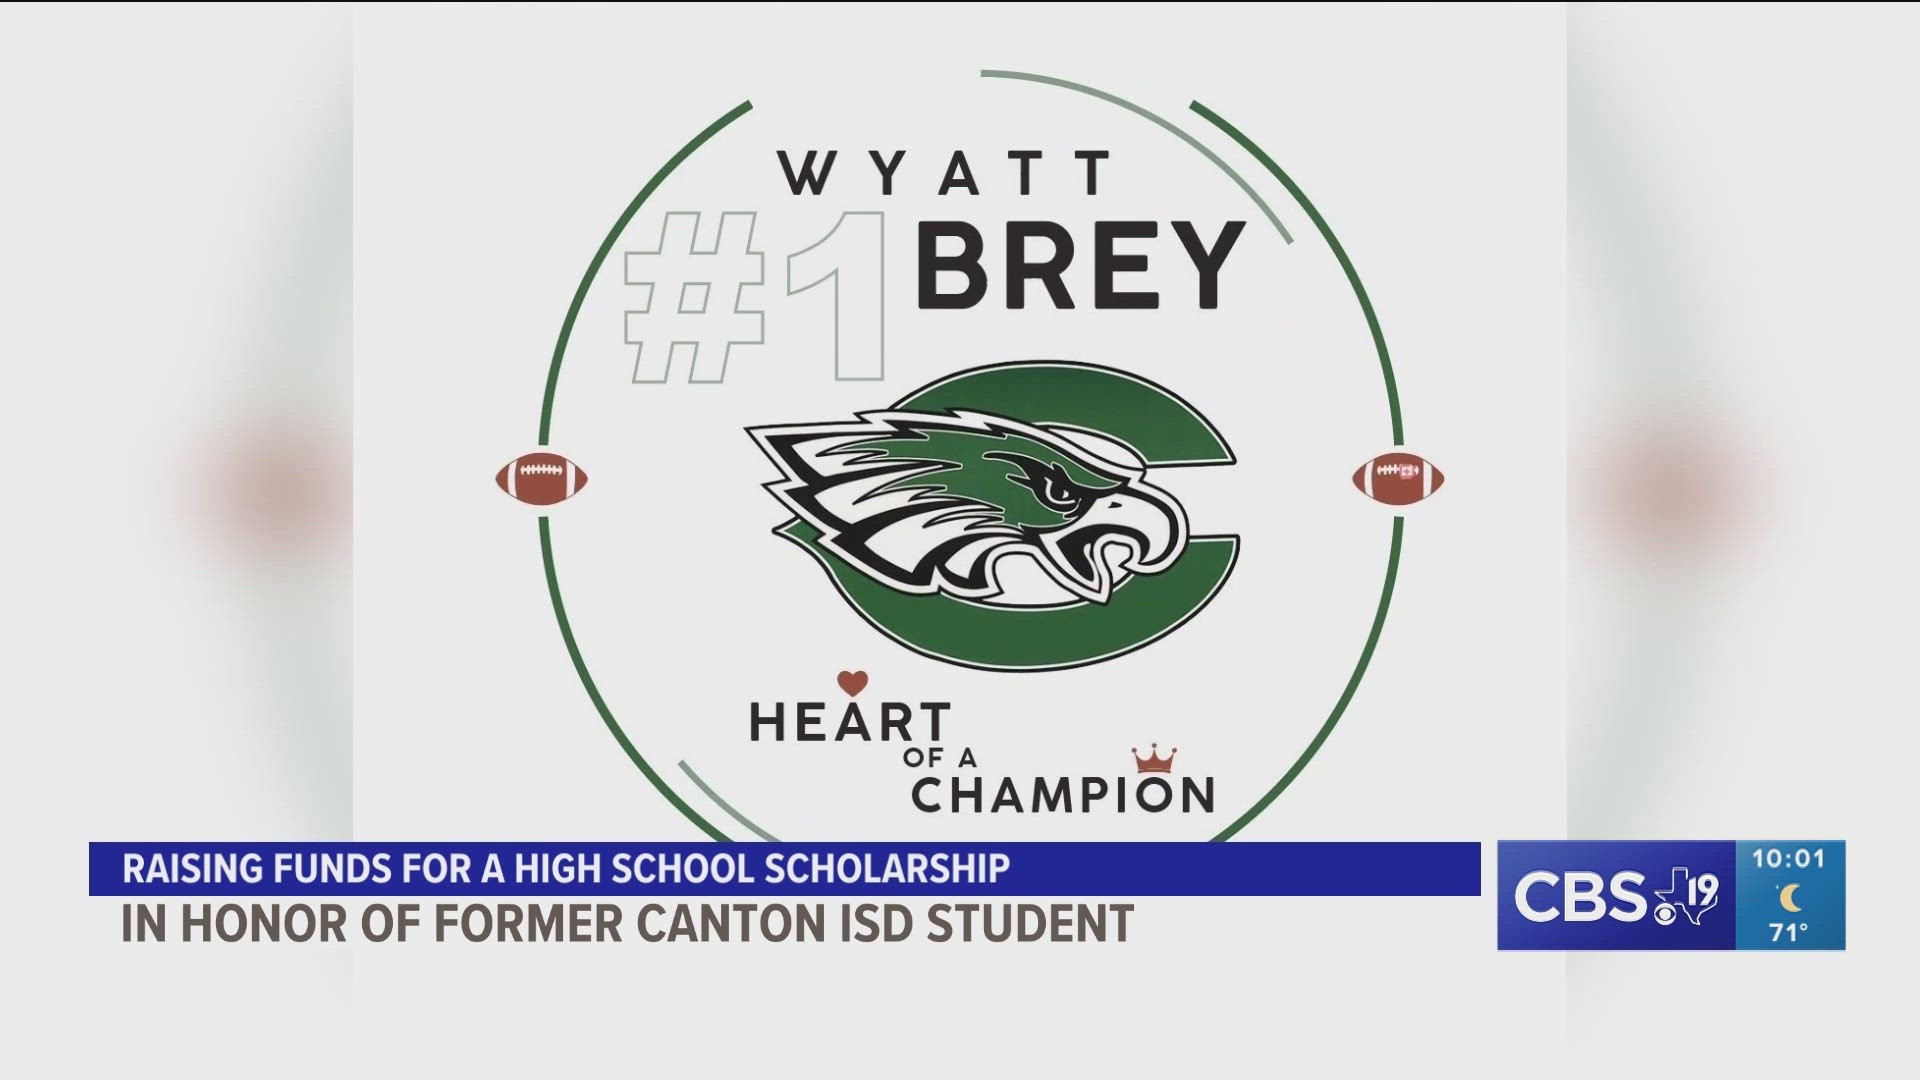 Canton ISD student Wyatt Brey tragically died in a car wreck in September 2022. The "Wyatt Brey Heart of a Champion Scholarship" aims to keep his name alive.